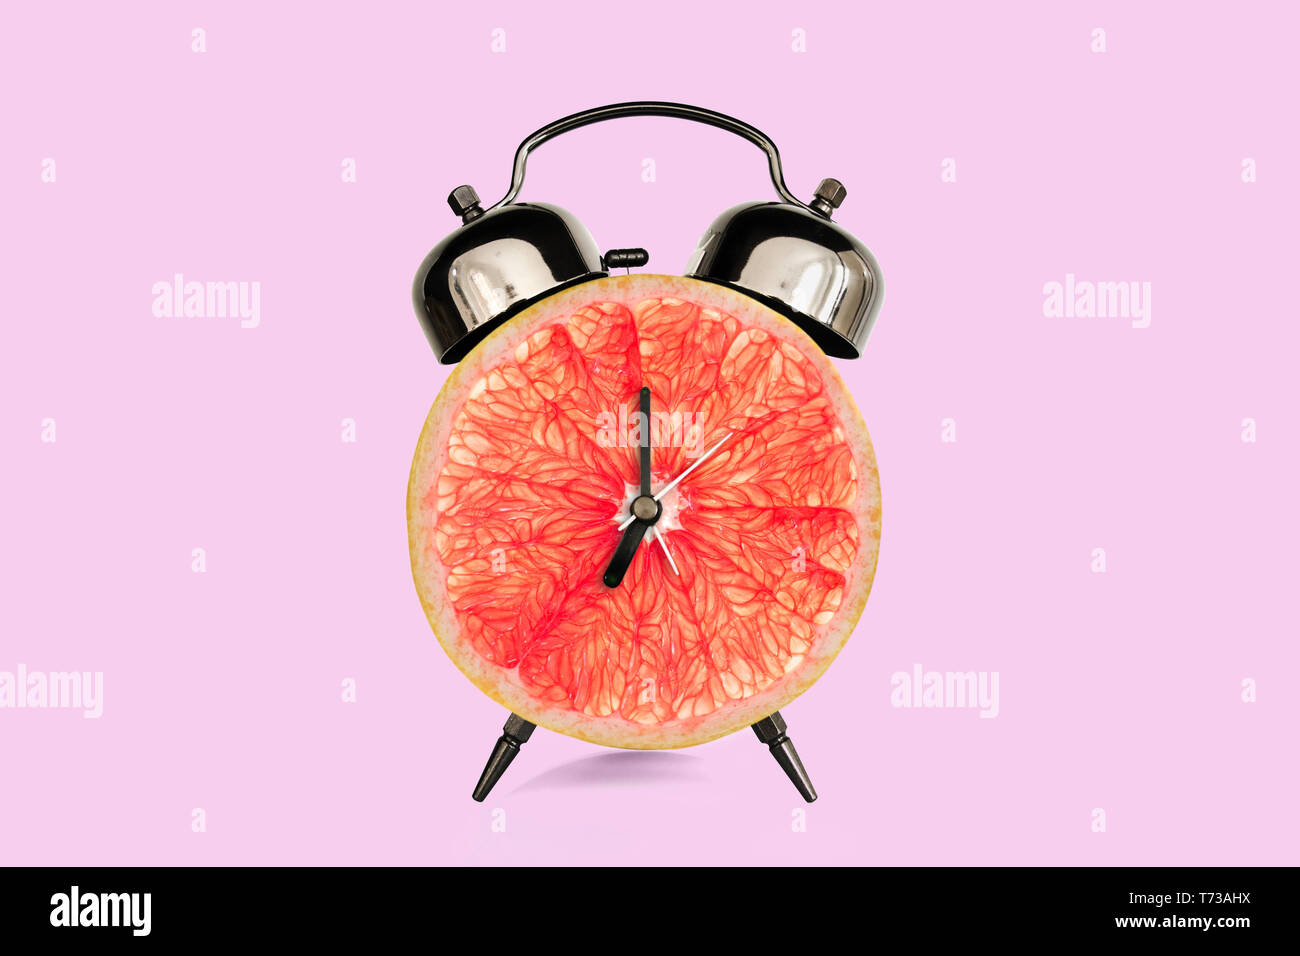 Grapefruit slice on alarm clock, pink pastel background. fruit and vitamins diet at breakfast nutrition concept Stock Photo